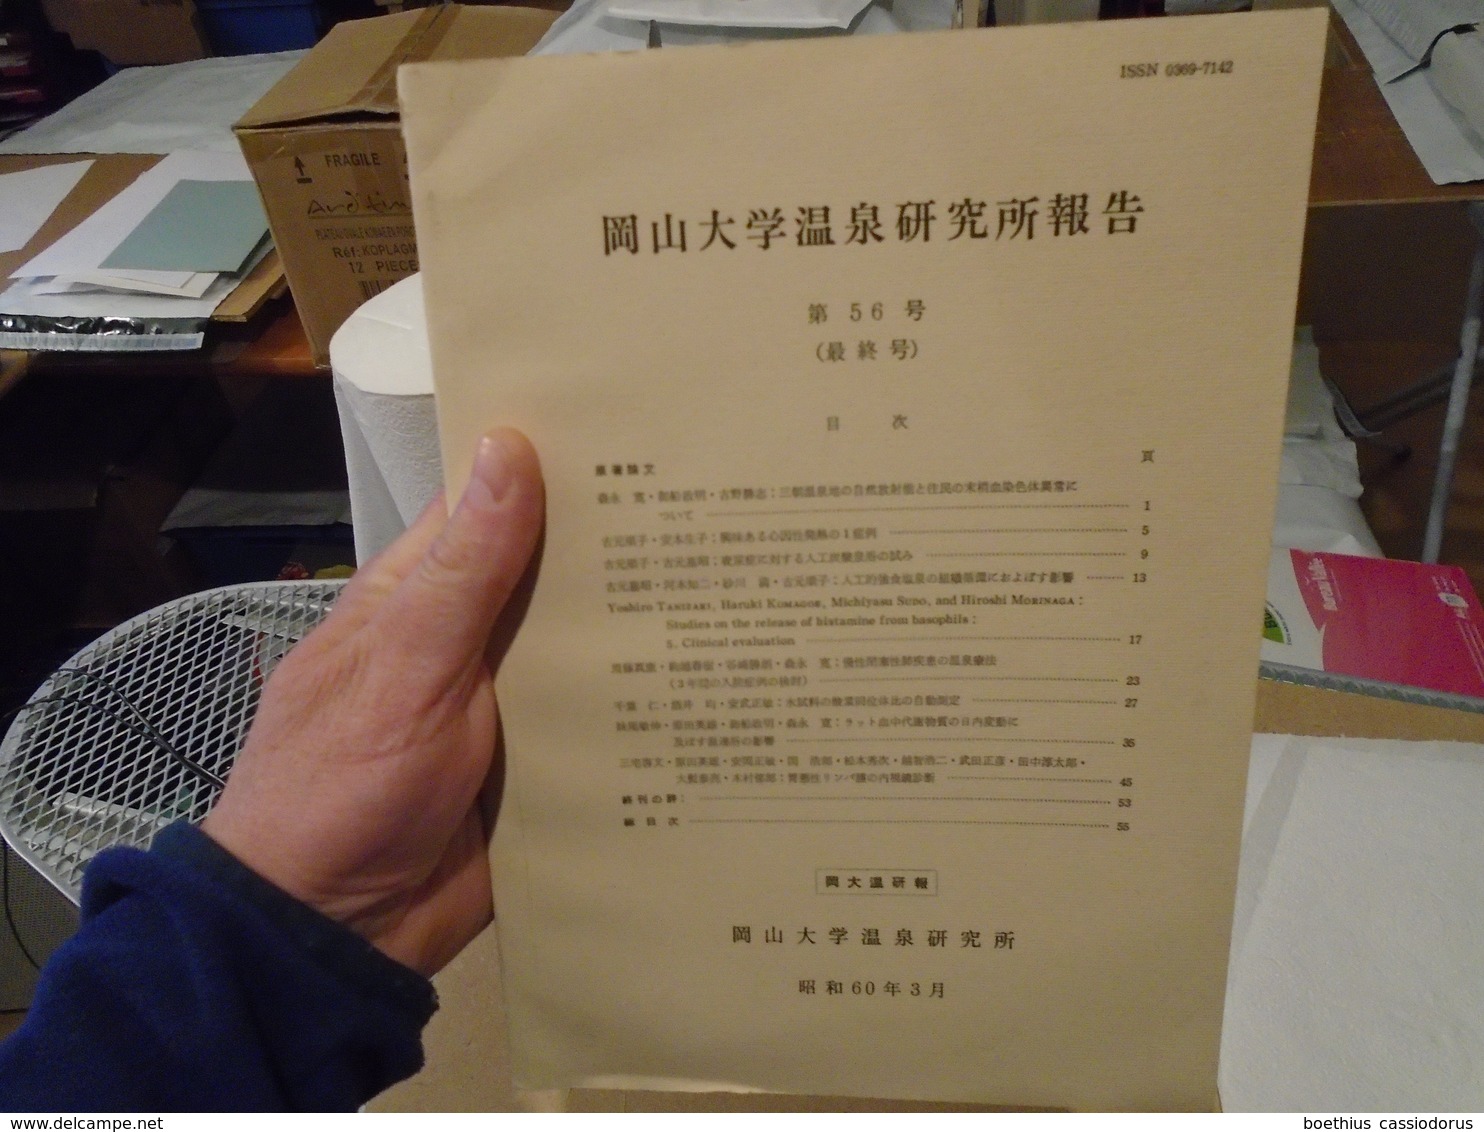 PAPERS OF THE INSTITUTE FOR THERMAL SPRING RESEARCH OKAYAMA UNIVERSITY 56 JAPAN - Culture